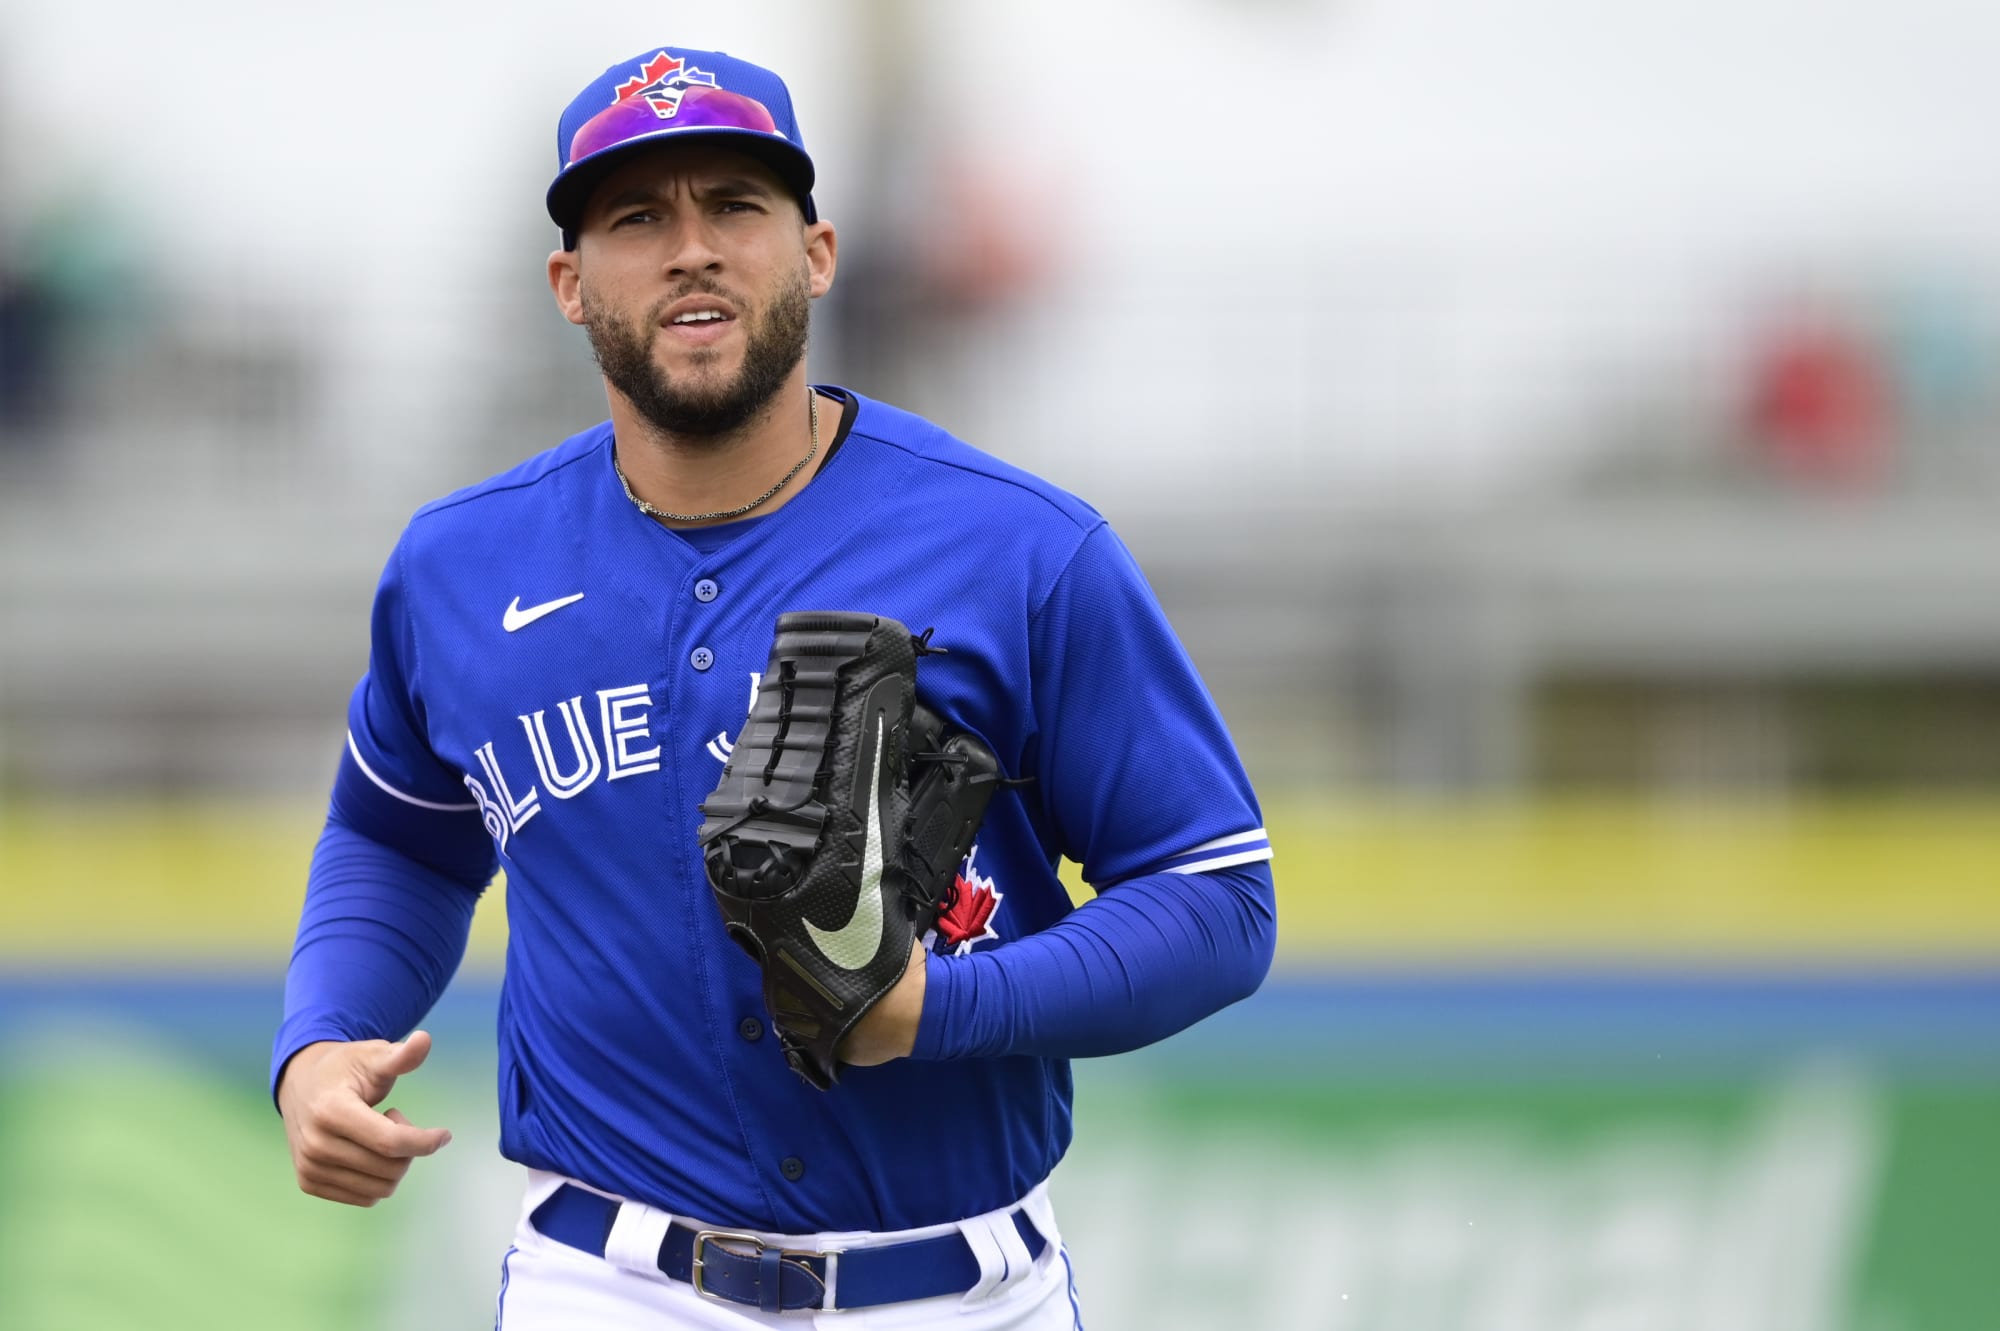 Toronto Blue Jays: George Springer's impact keeping team in contention